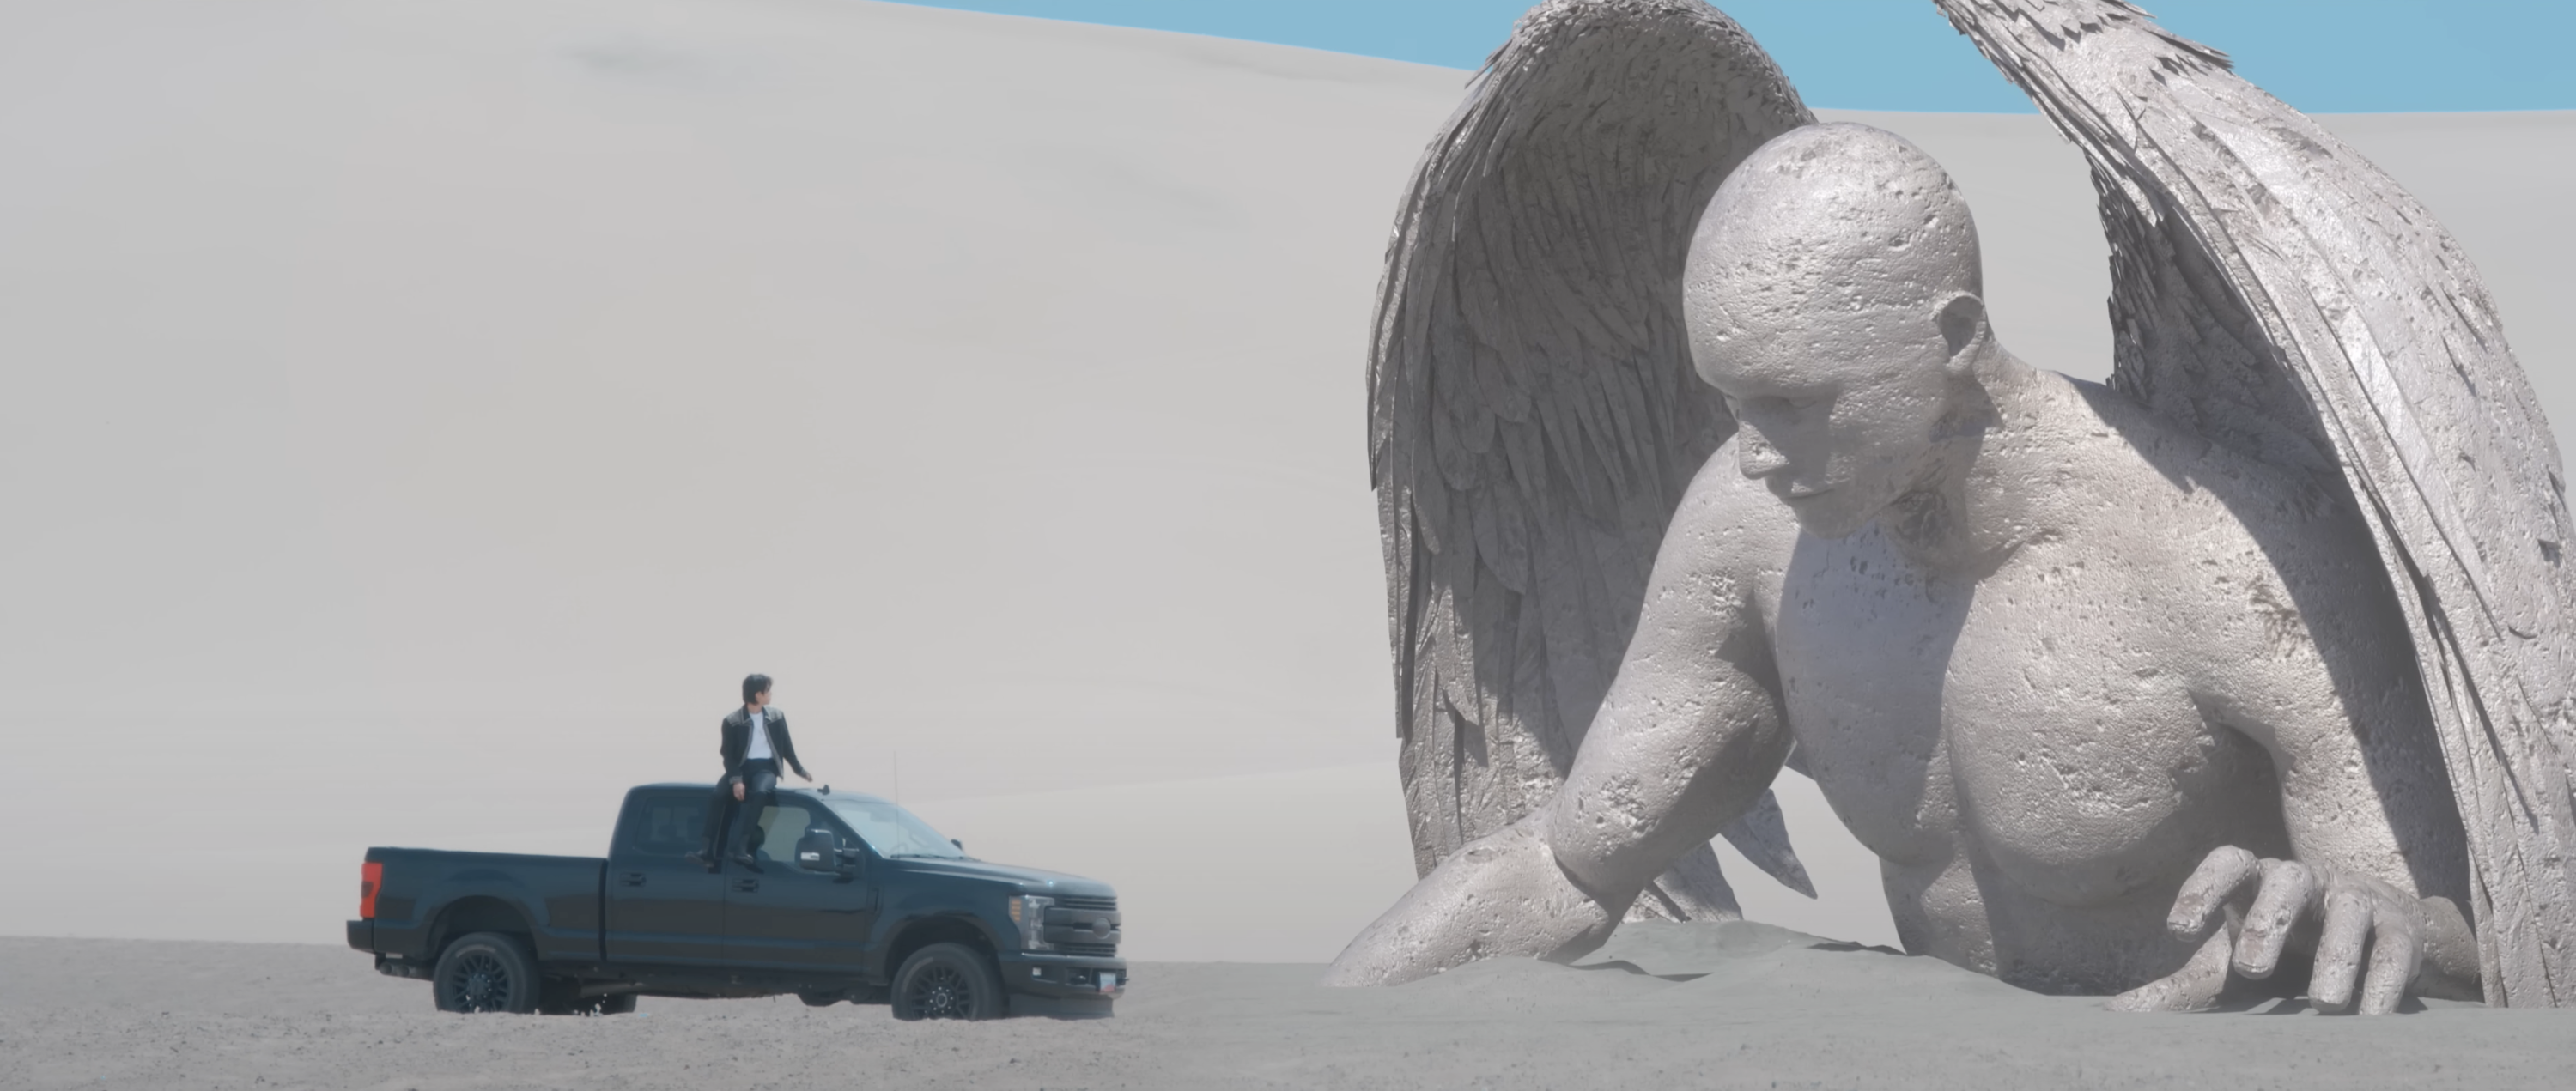 A still from a music video shows a member of BTA sitting on a truck facing an angel statue in the desert